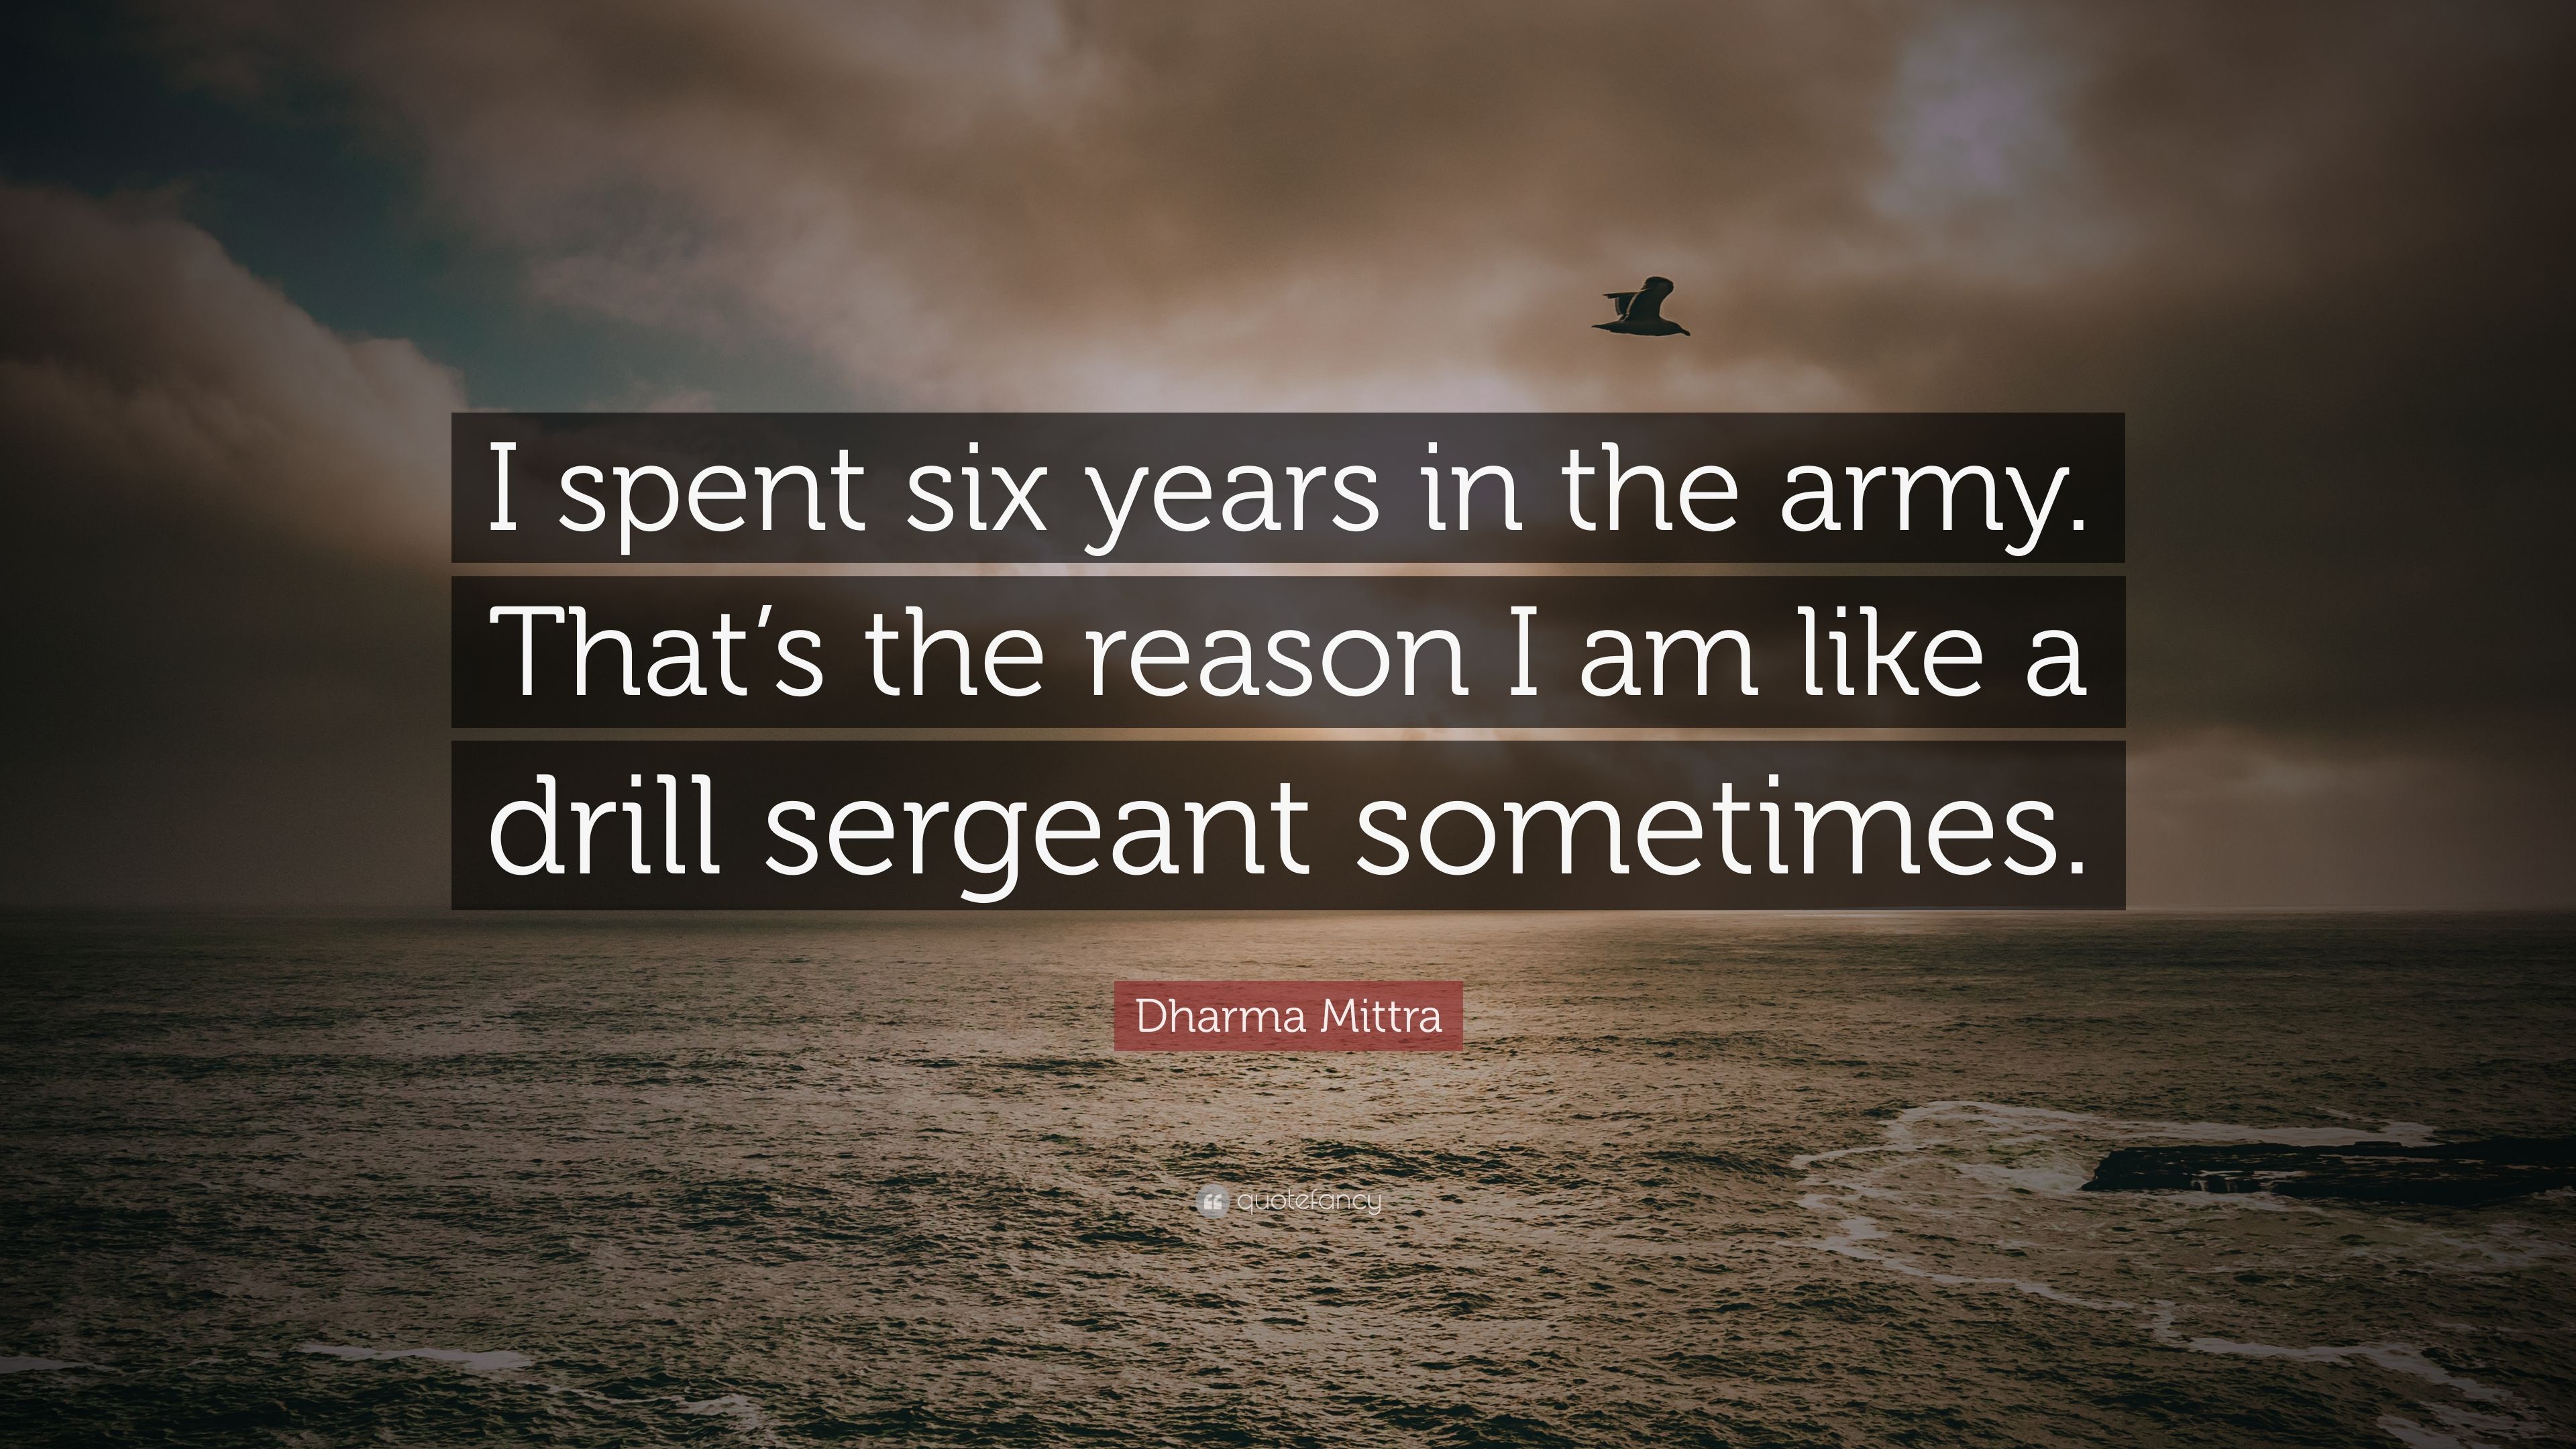 Dharma Mittra Quote: "I spent six years in the army. 